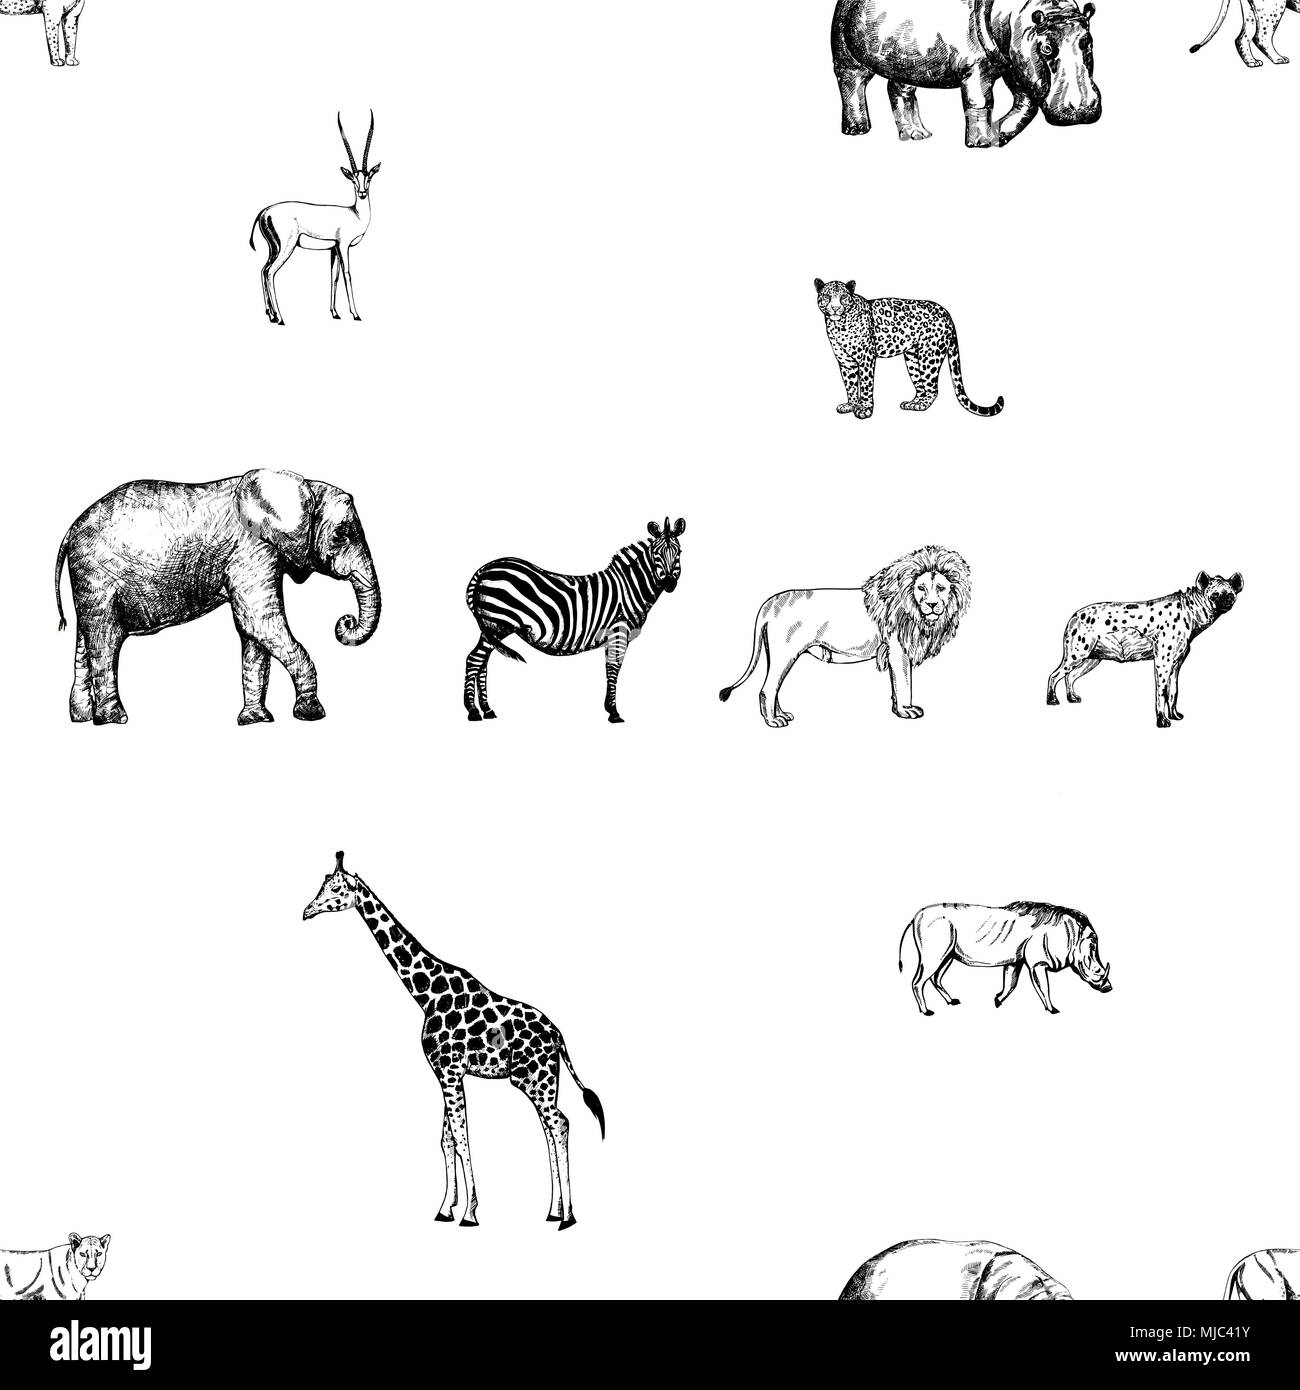 Seamless pattern of hand drawn sketch style animals isolated on white background. Vector illustration. Stock Vector